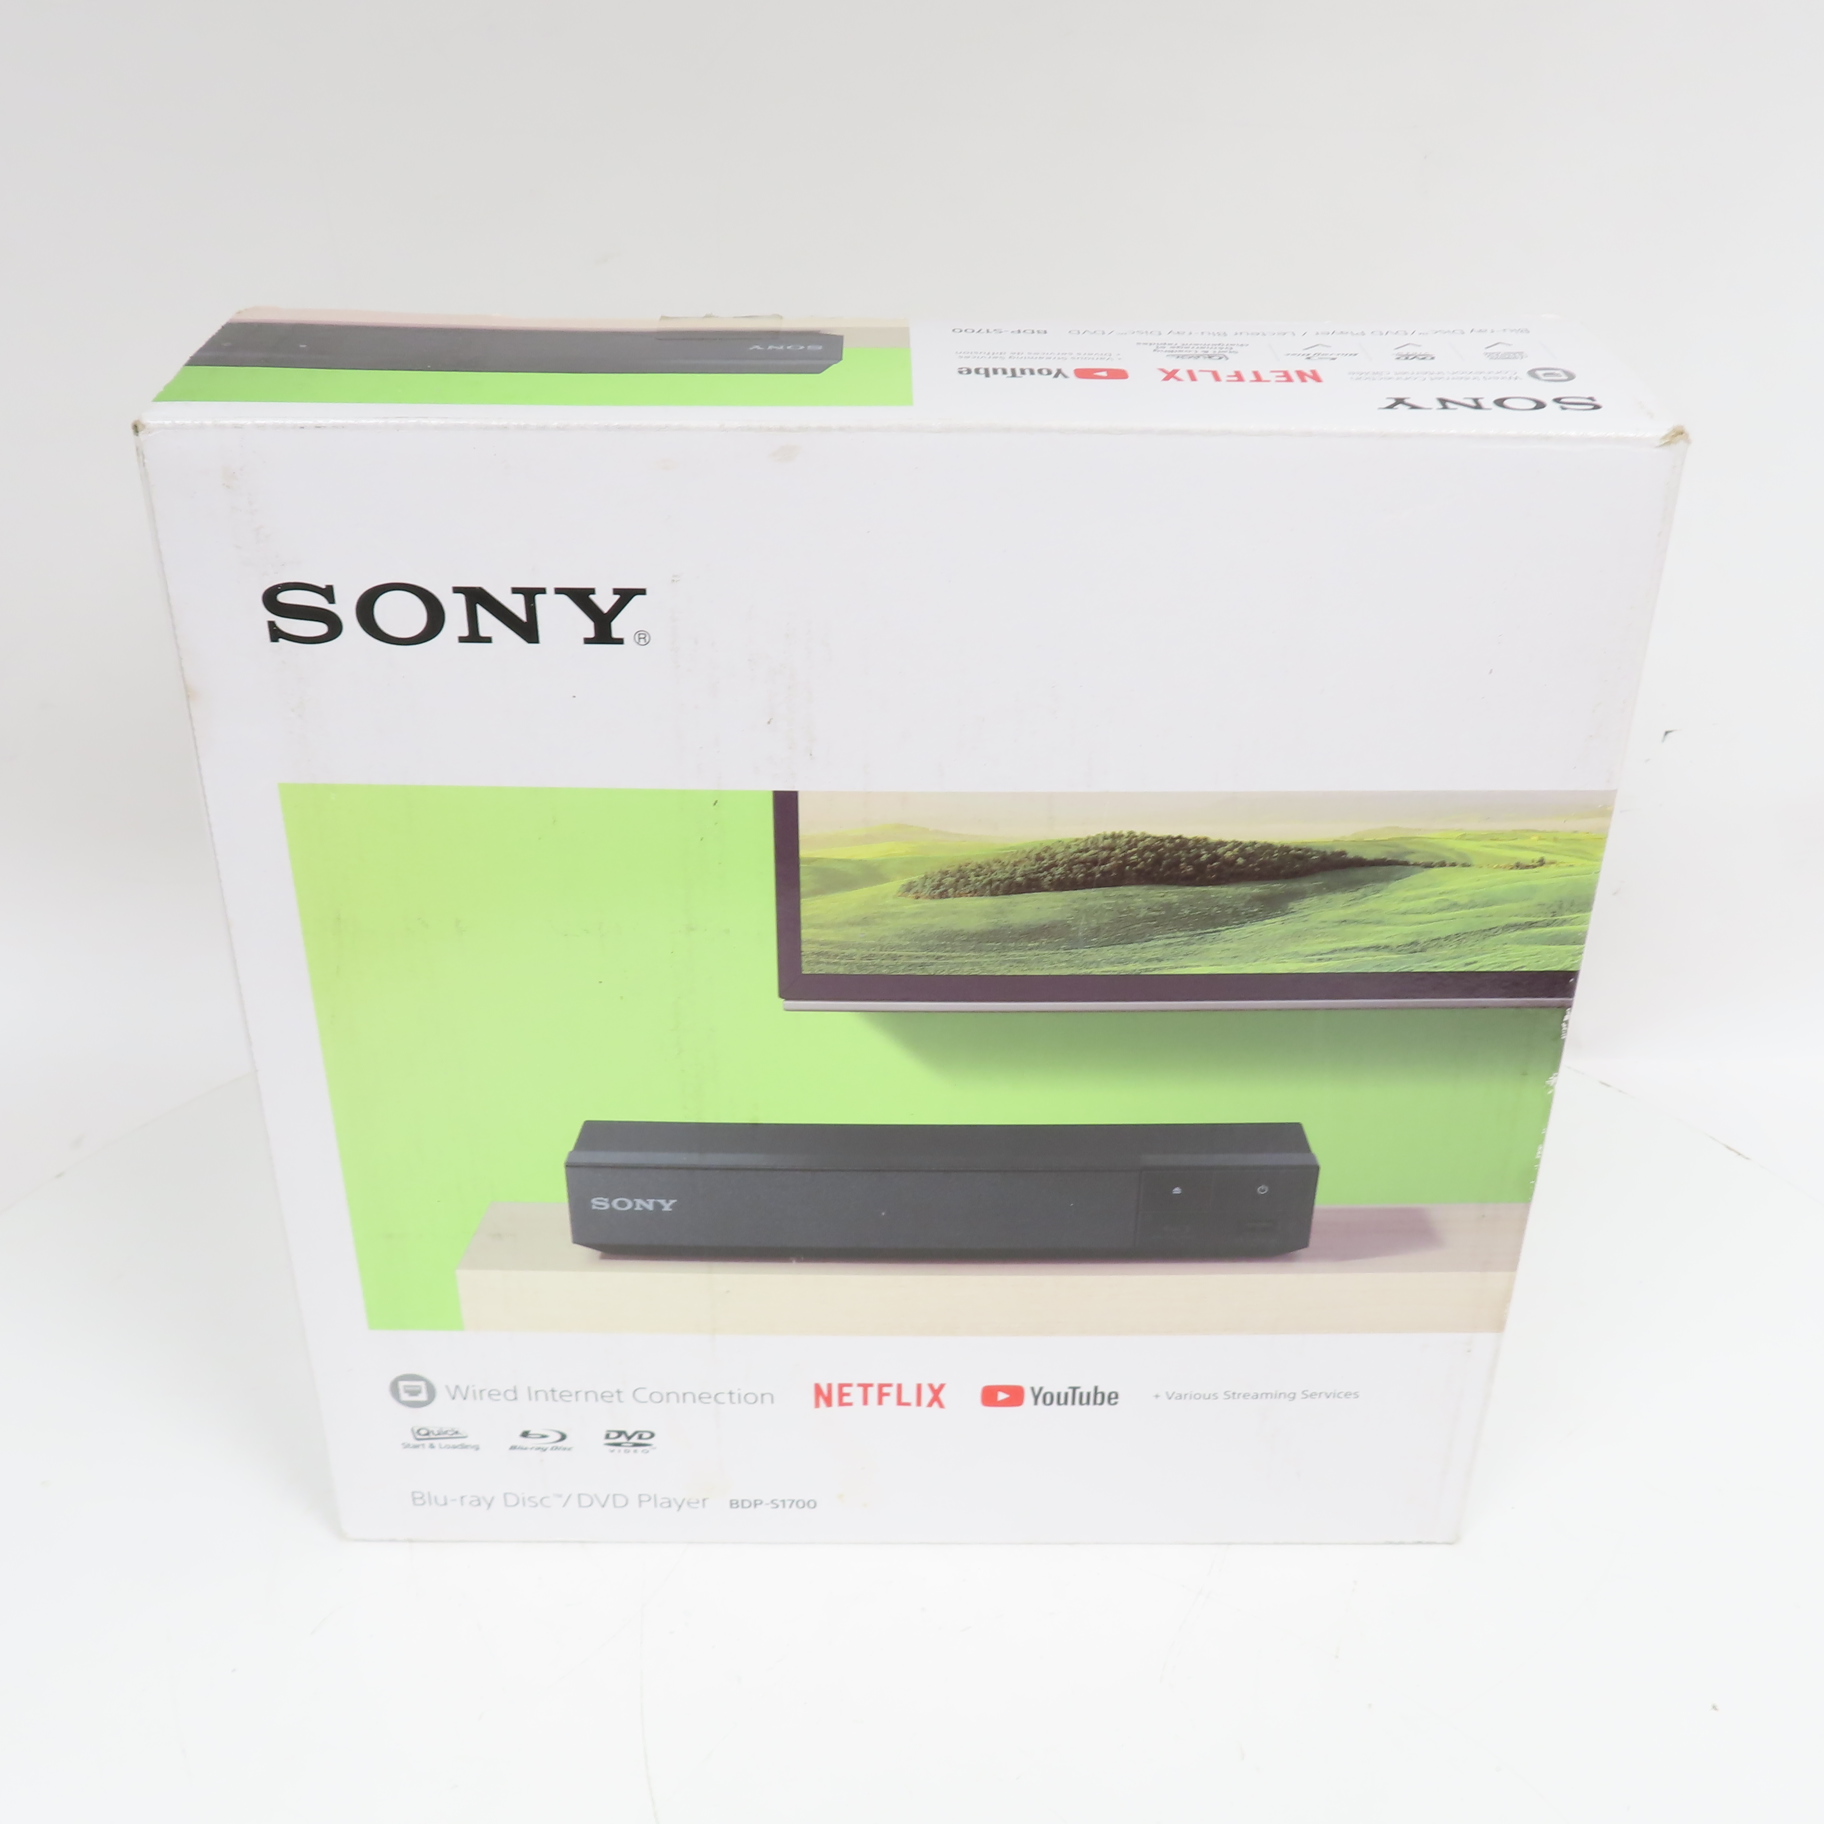 Sony BDP-S1700 Wi-Fi Connected Blu-Ray/DVD Player (In Box)